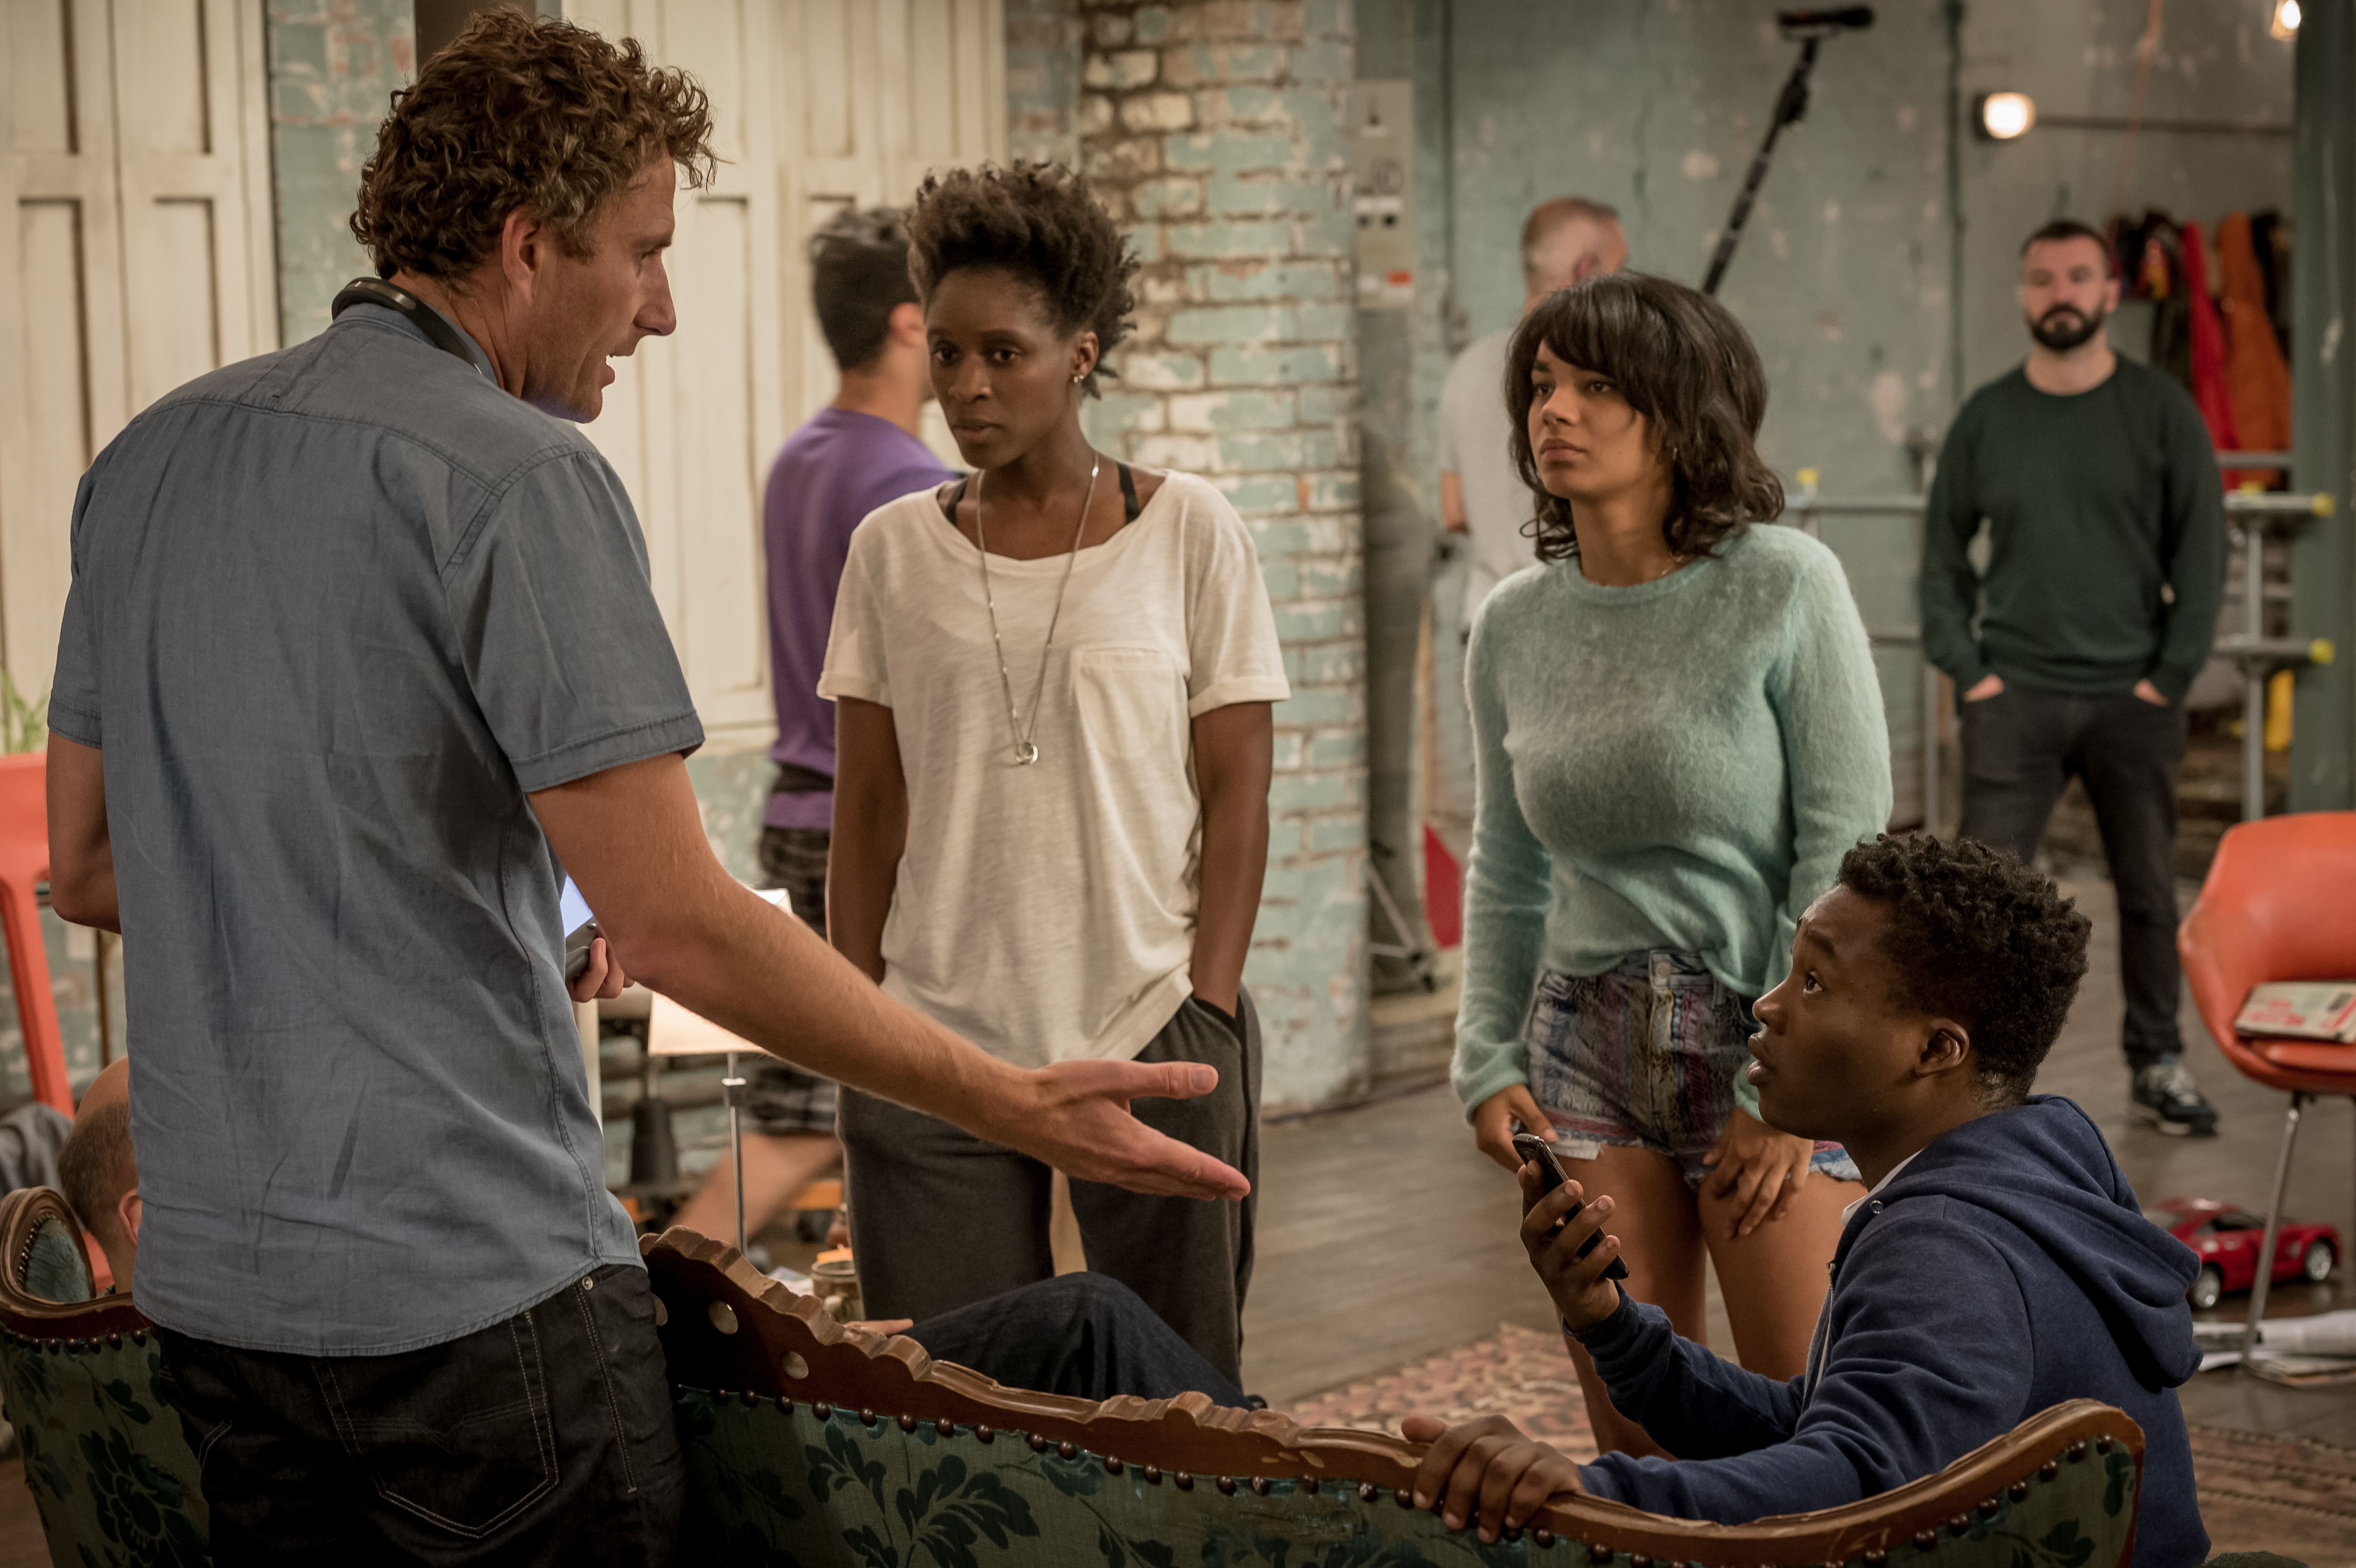 Still of director Euros Lynn, with Sharon Duncan-Brewster, Red Madrell and Fisayo Akinade on the set of 'Cucumber'(2015).